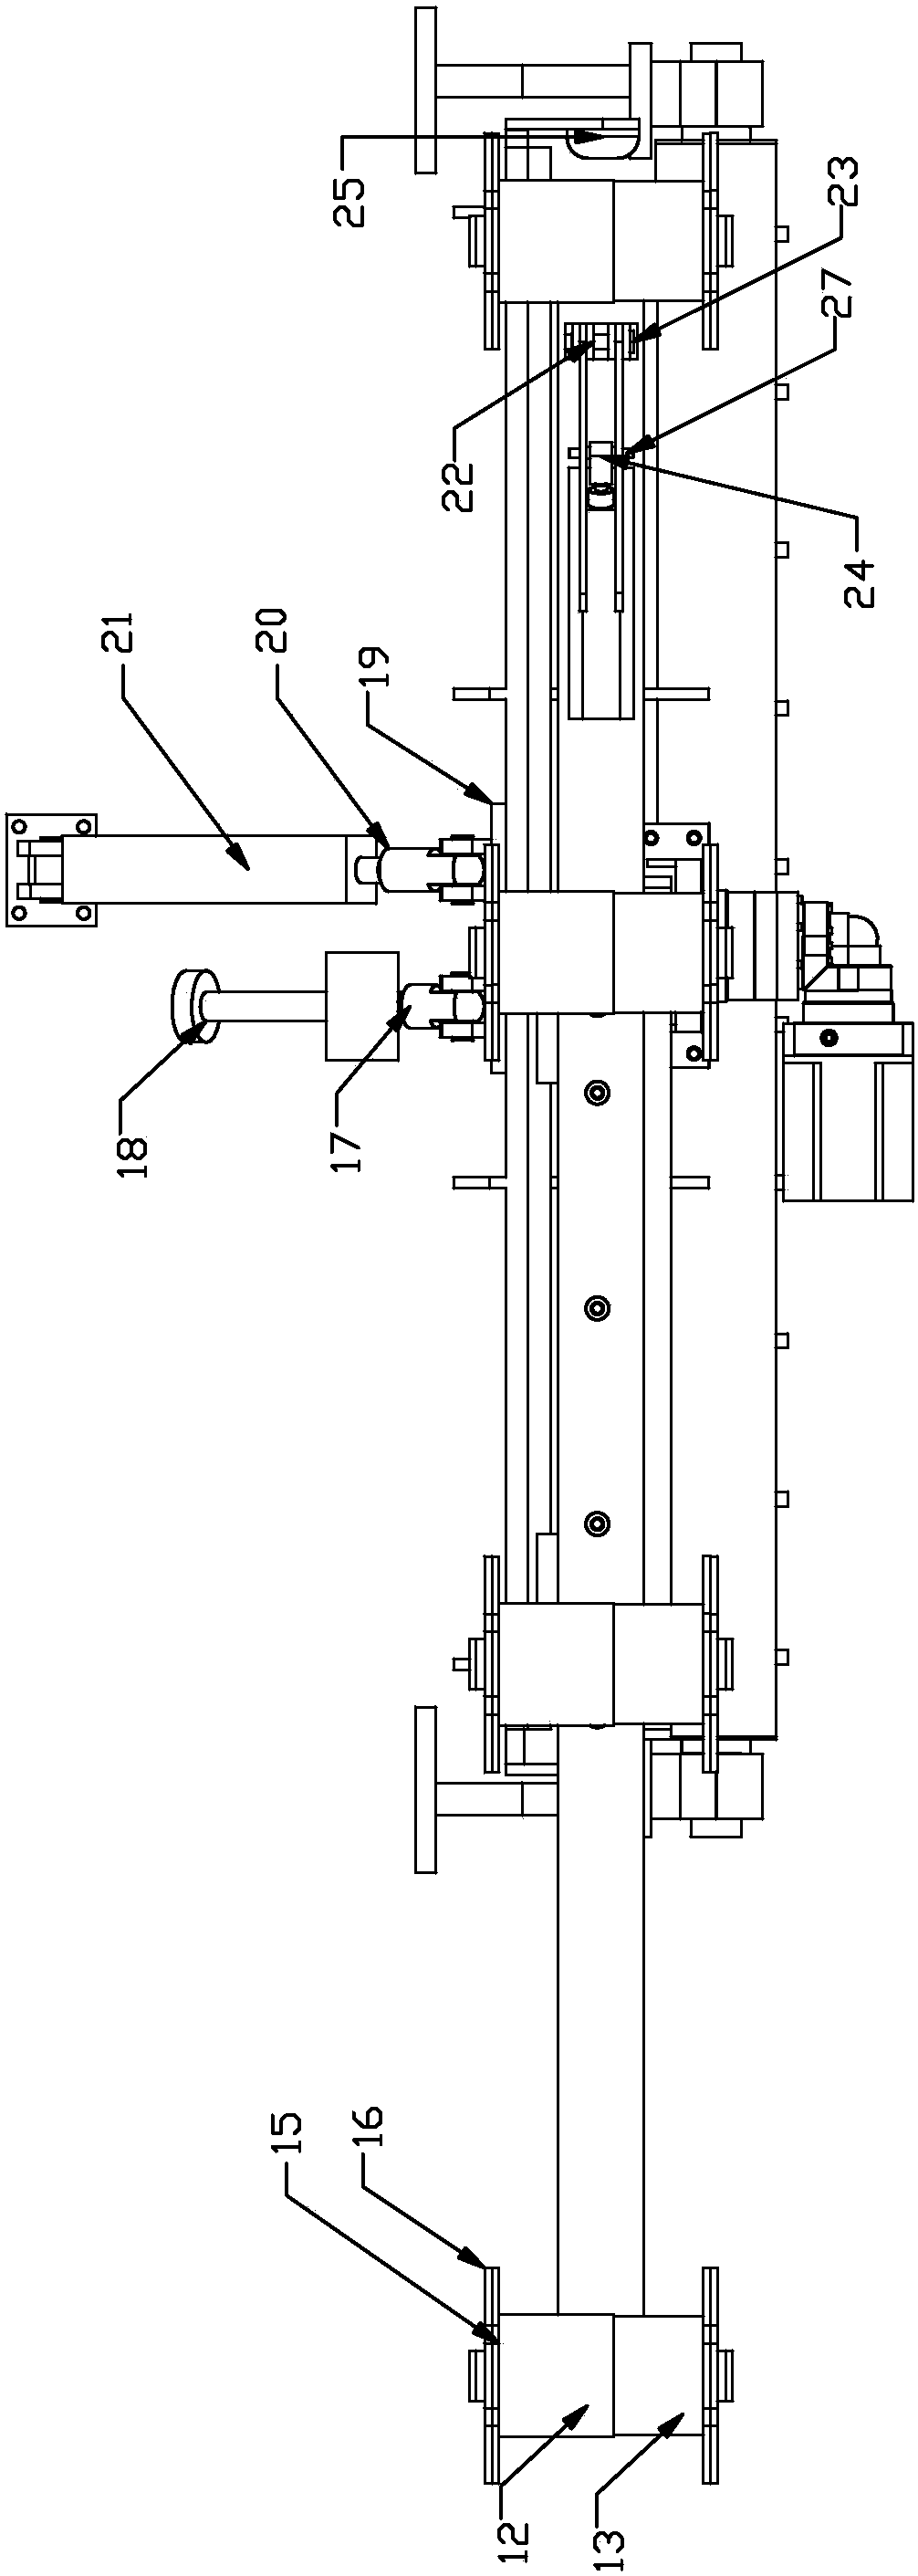 A rim automatic loading and unloading mechanism